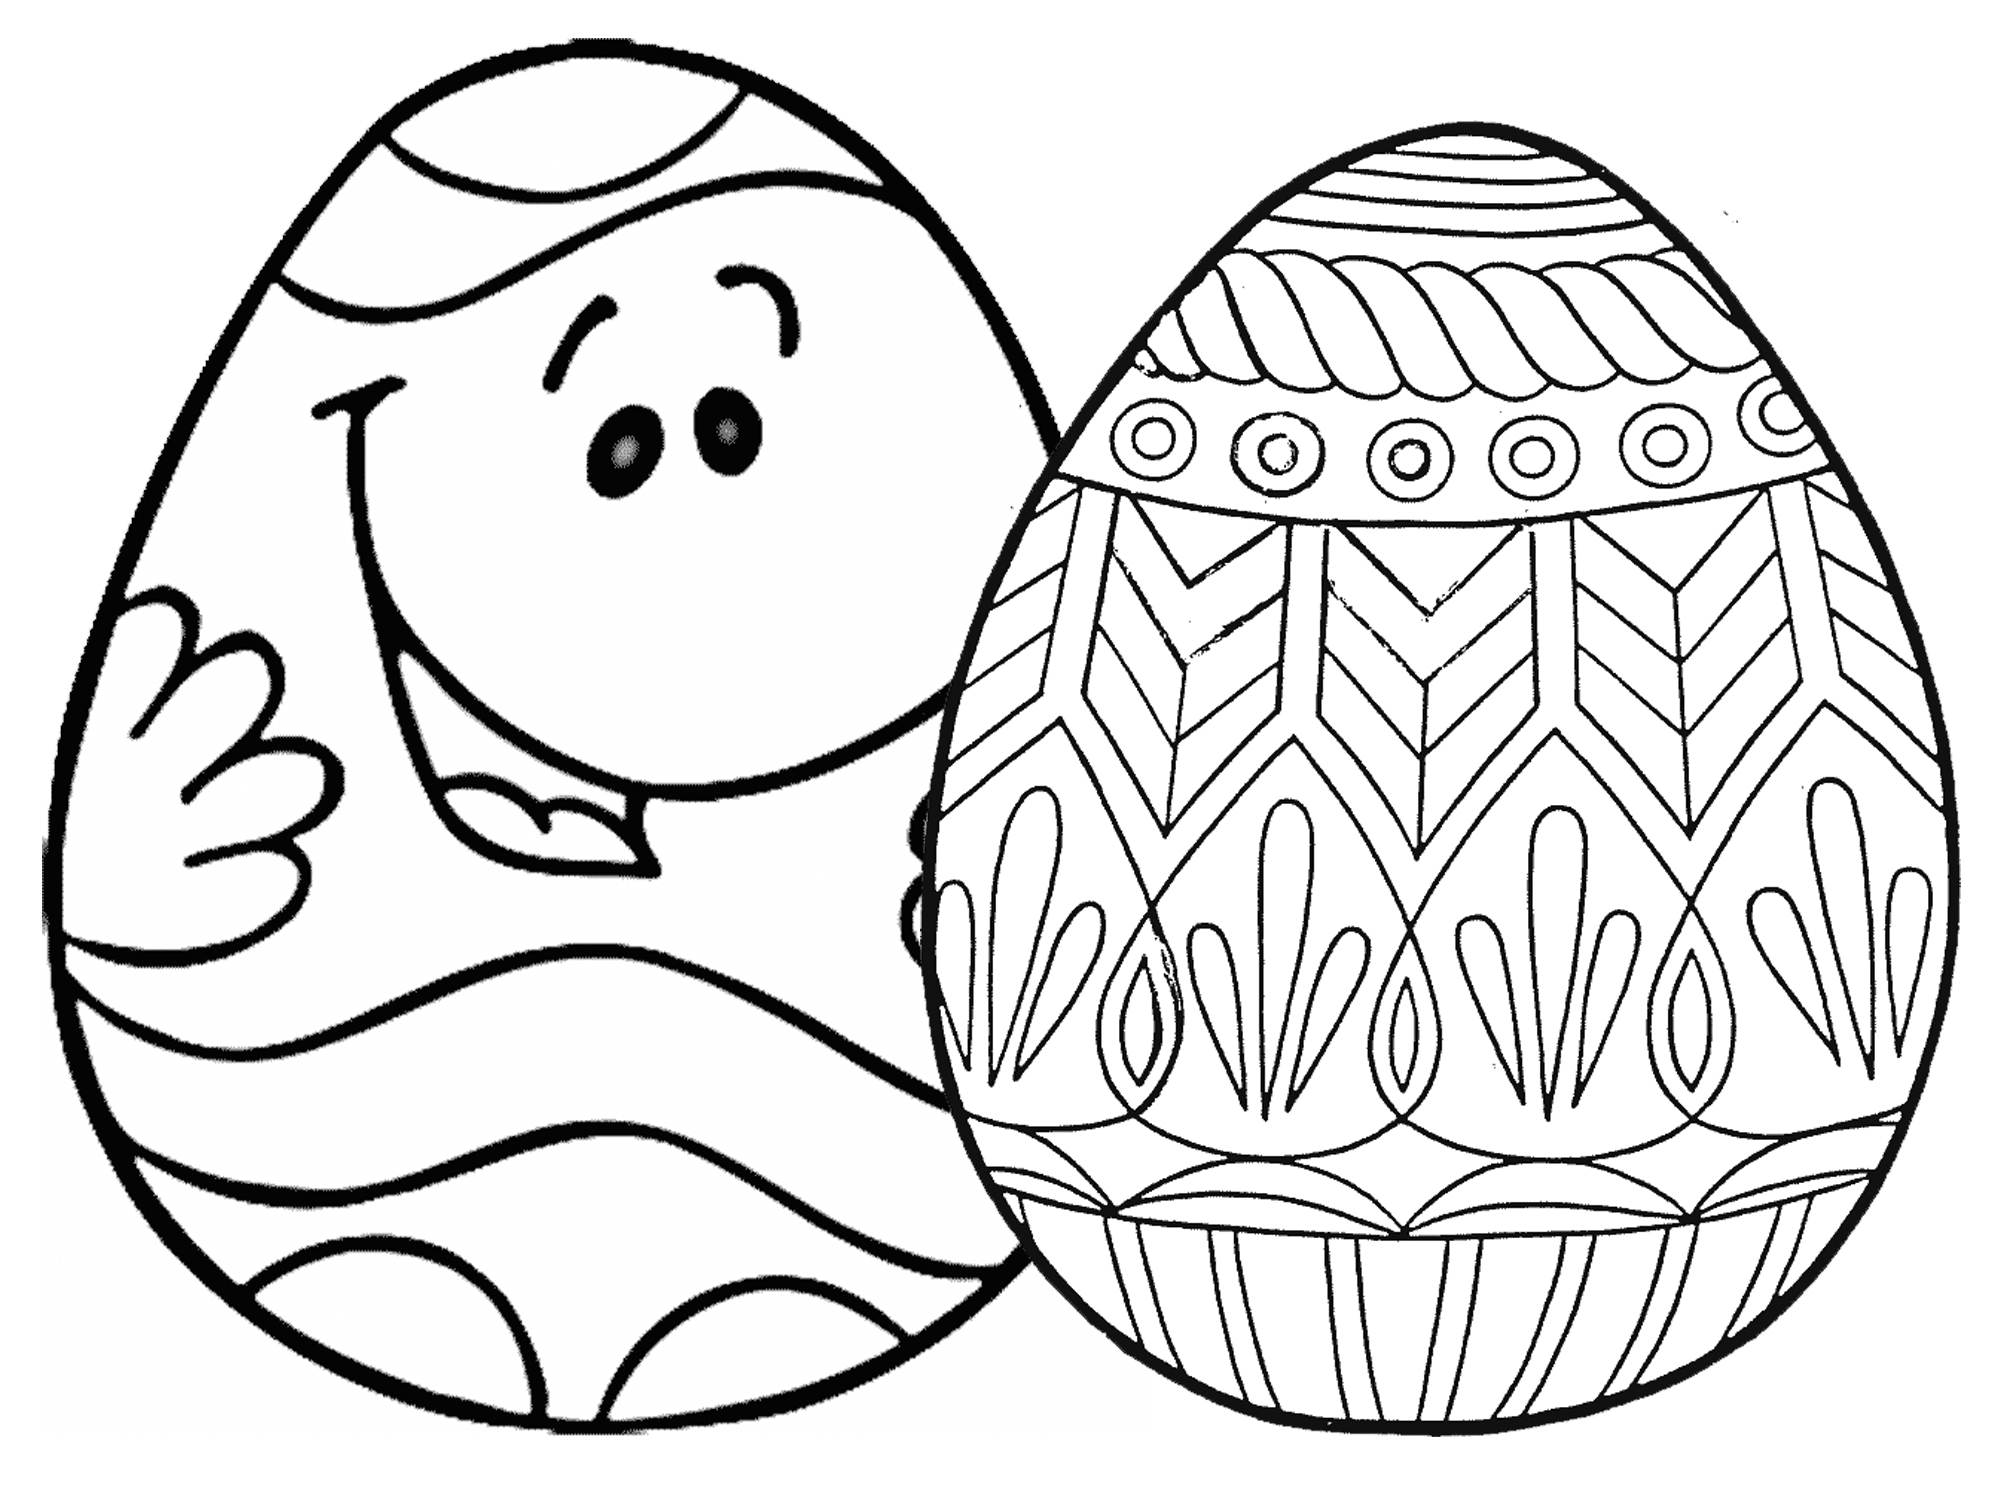 Easter Egg Coloring Page 7 Places For Free Printable Easter Egg Coloring Pages